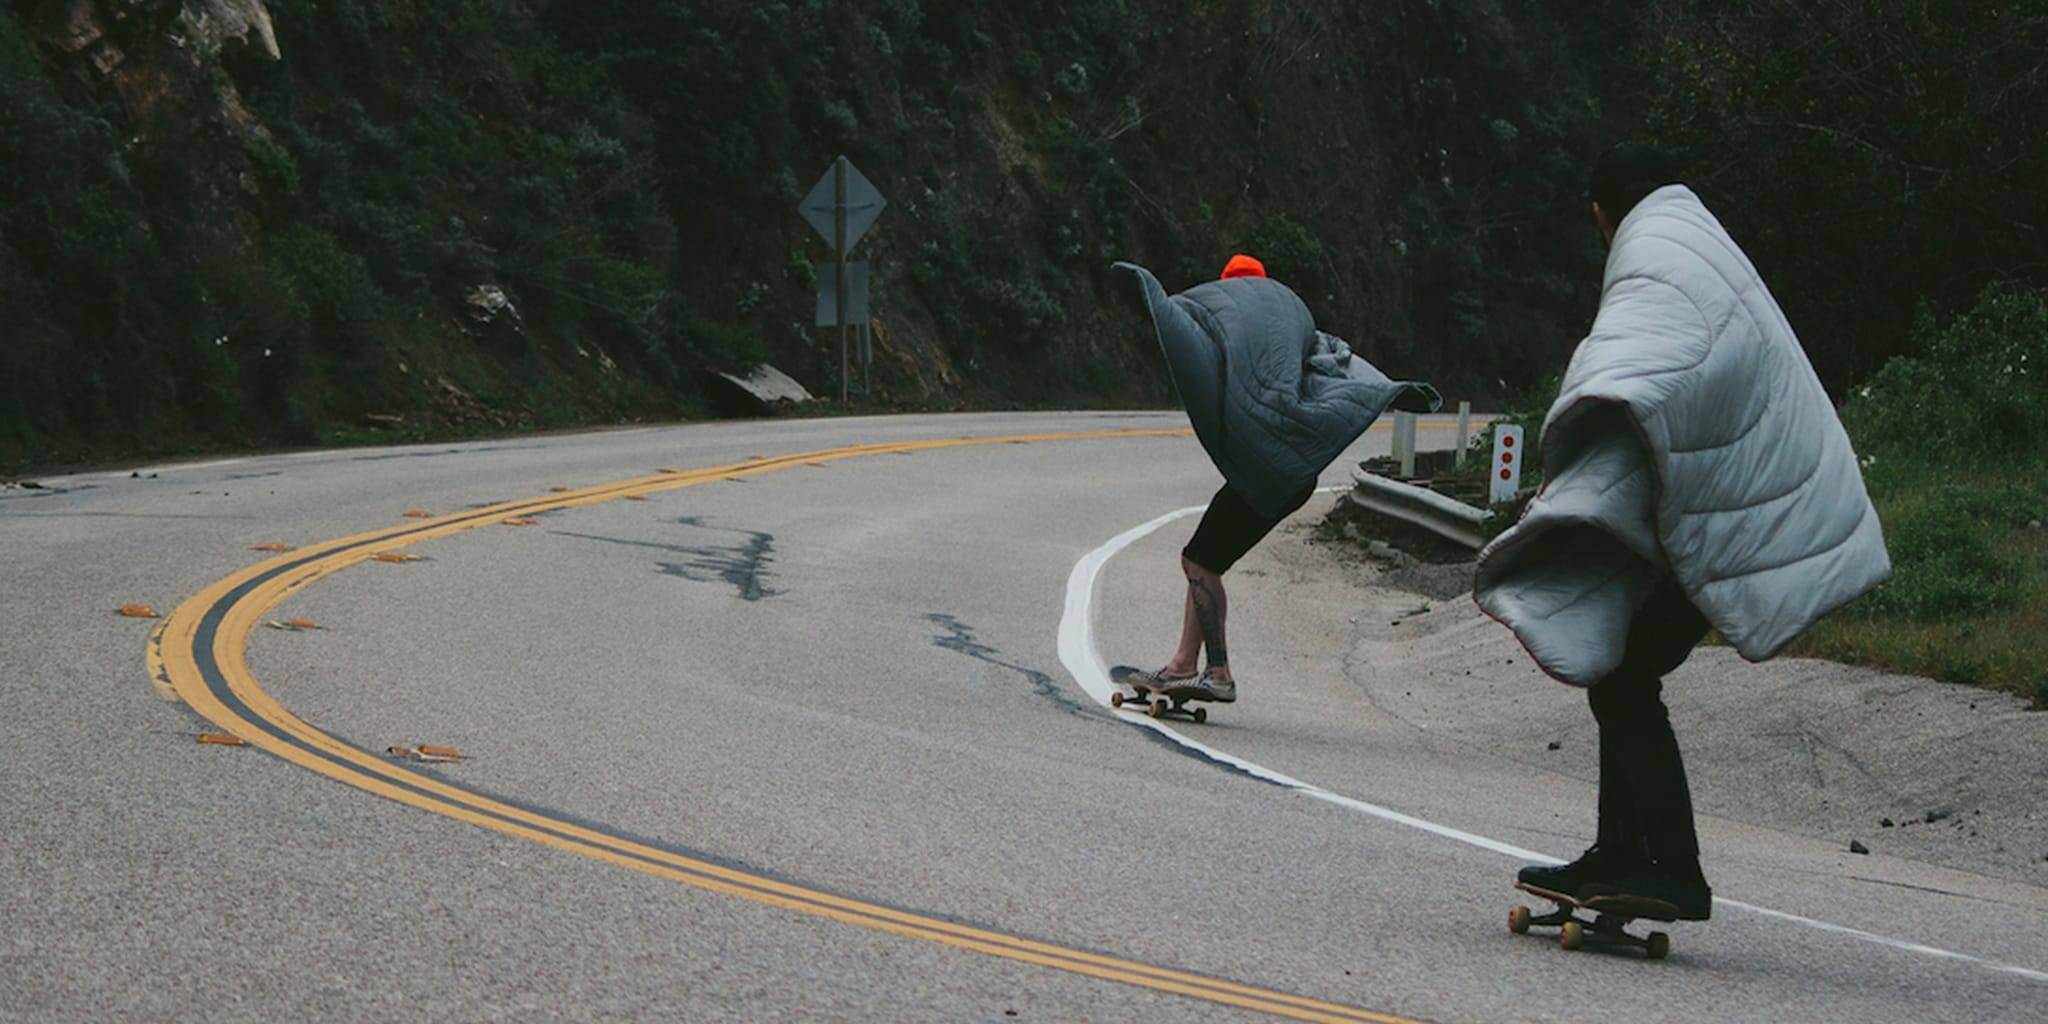 Two guys skateboarding on a road down the hill with Rumpl blankets